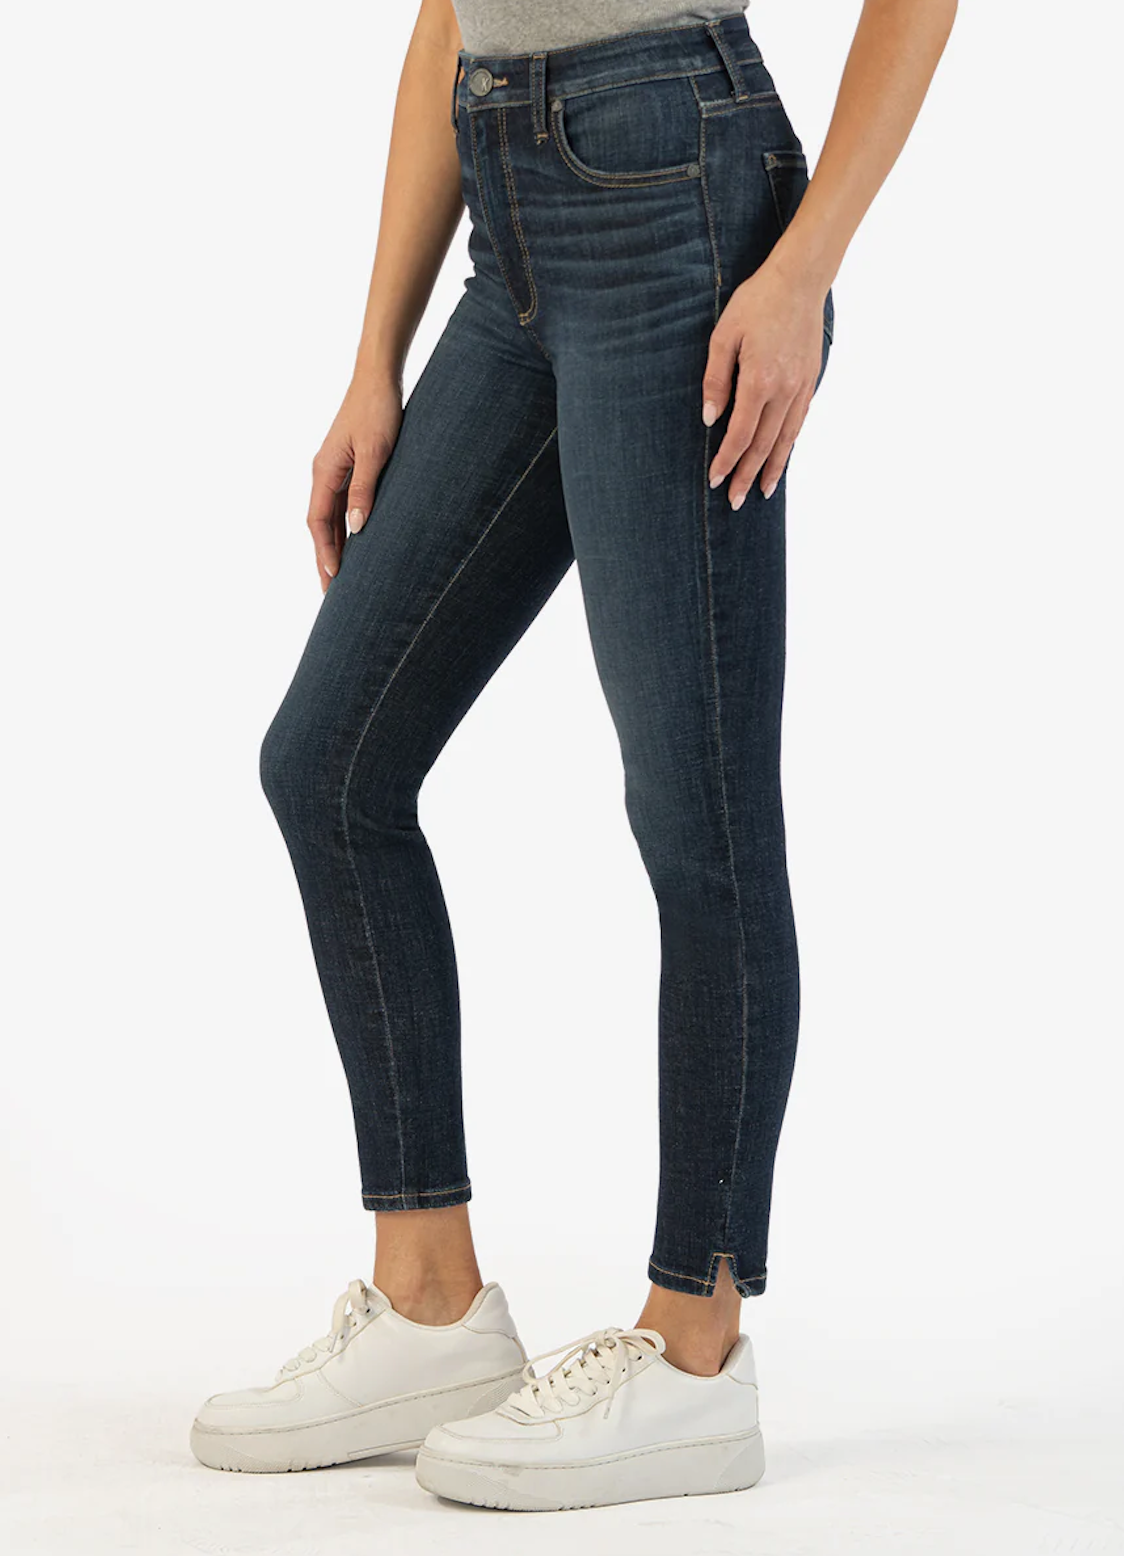 KUT FROM THE KLOTH CONNIE HIGH RISE ANKLE SKINNY IN HERO